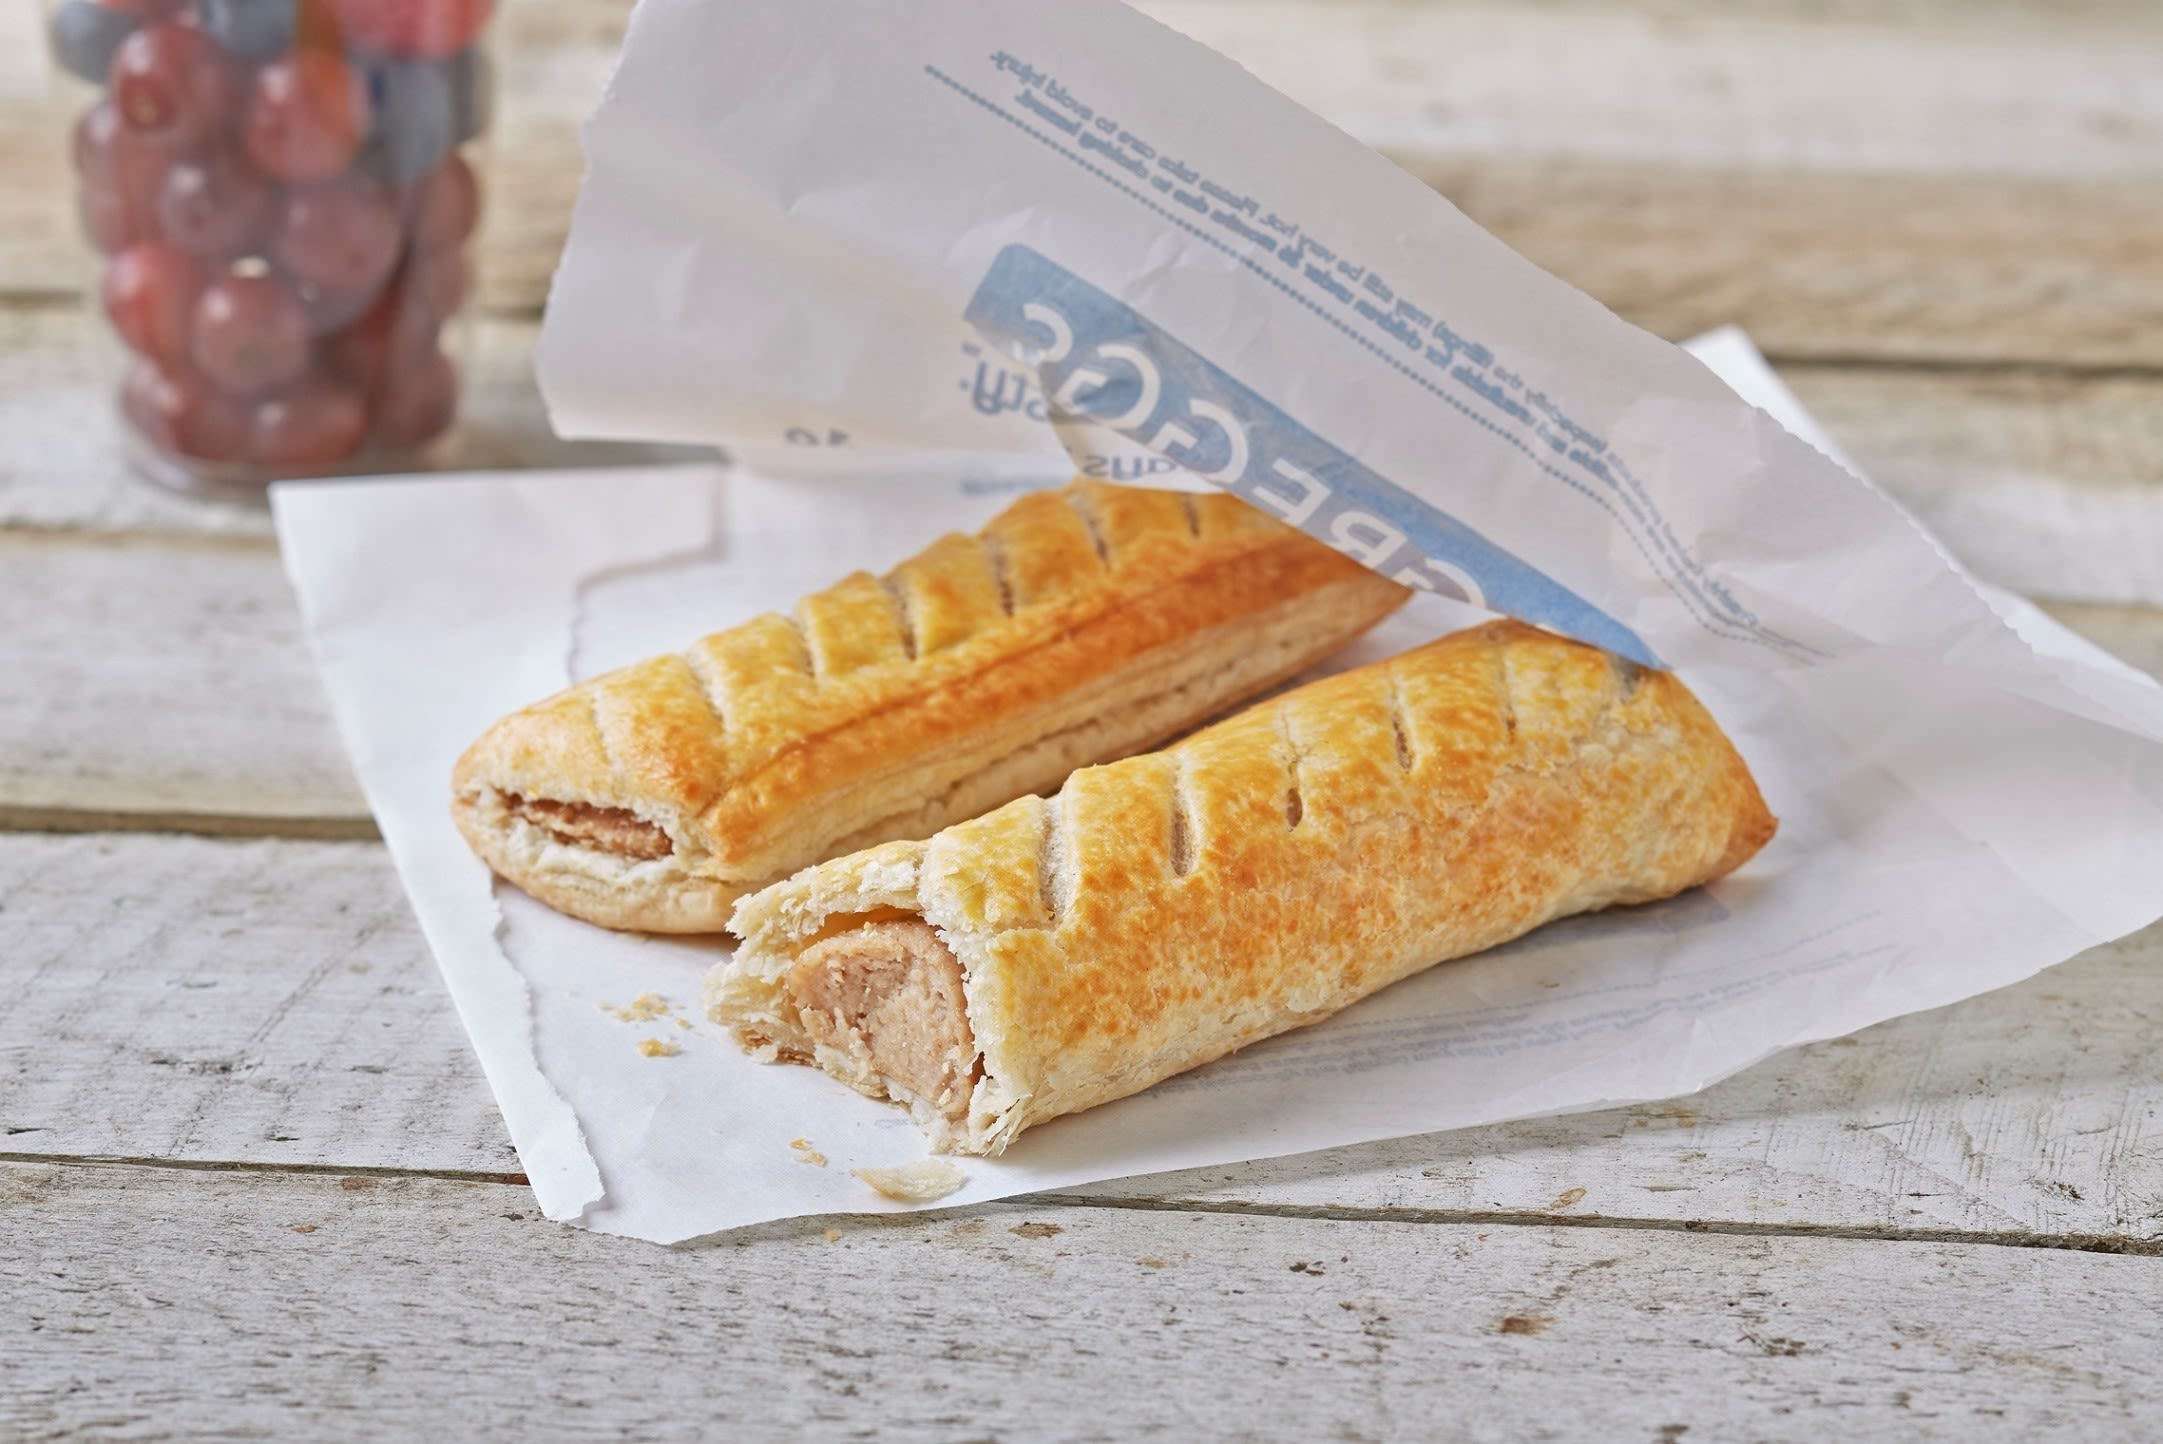 Image of a sausage roll from Greggs.